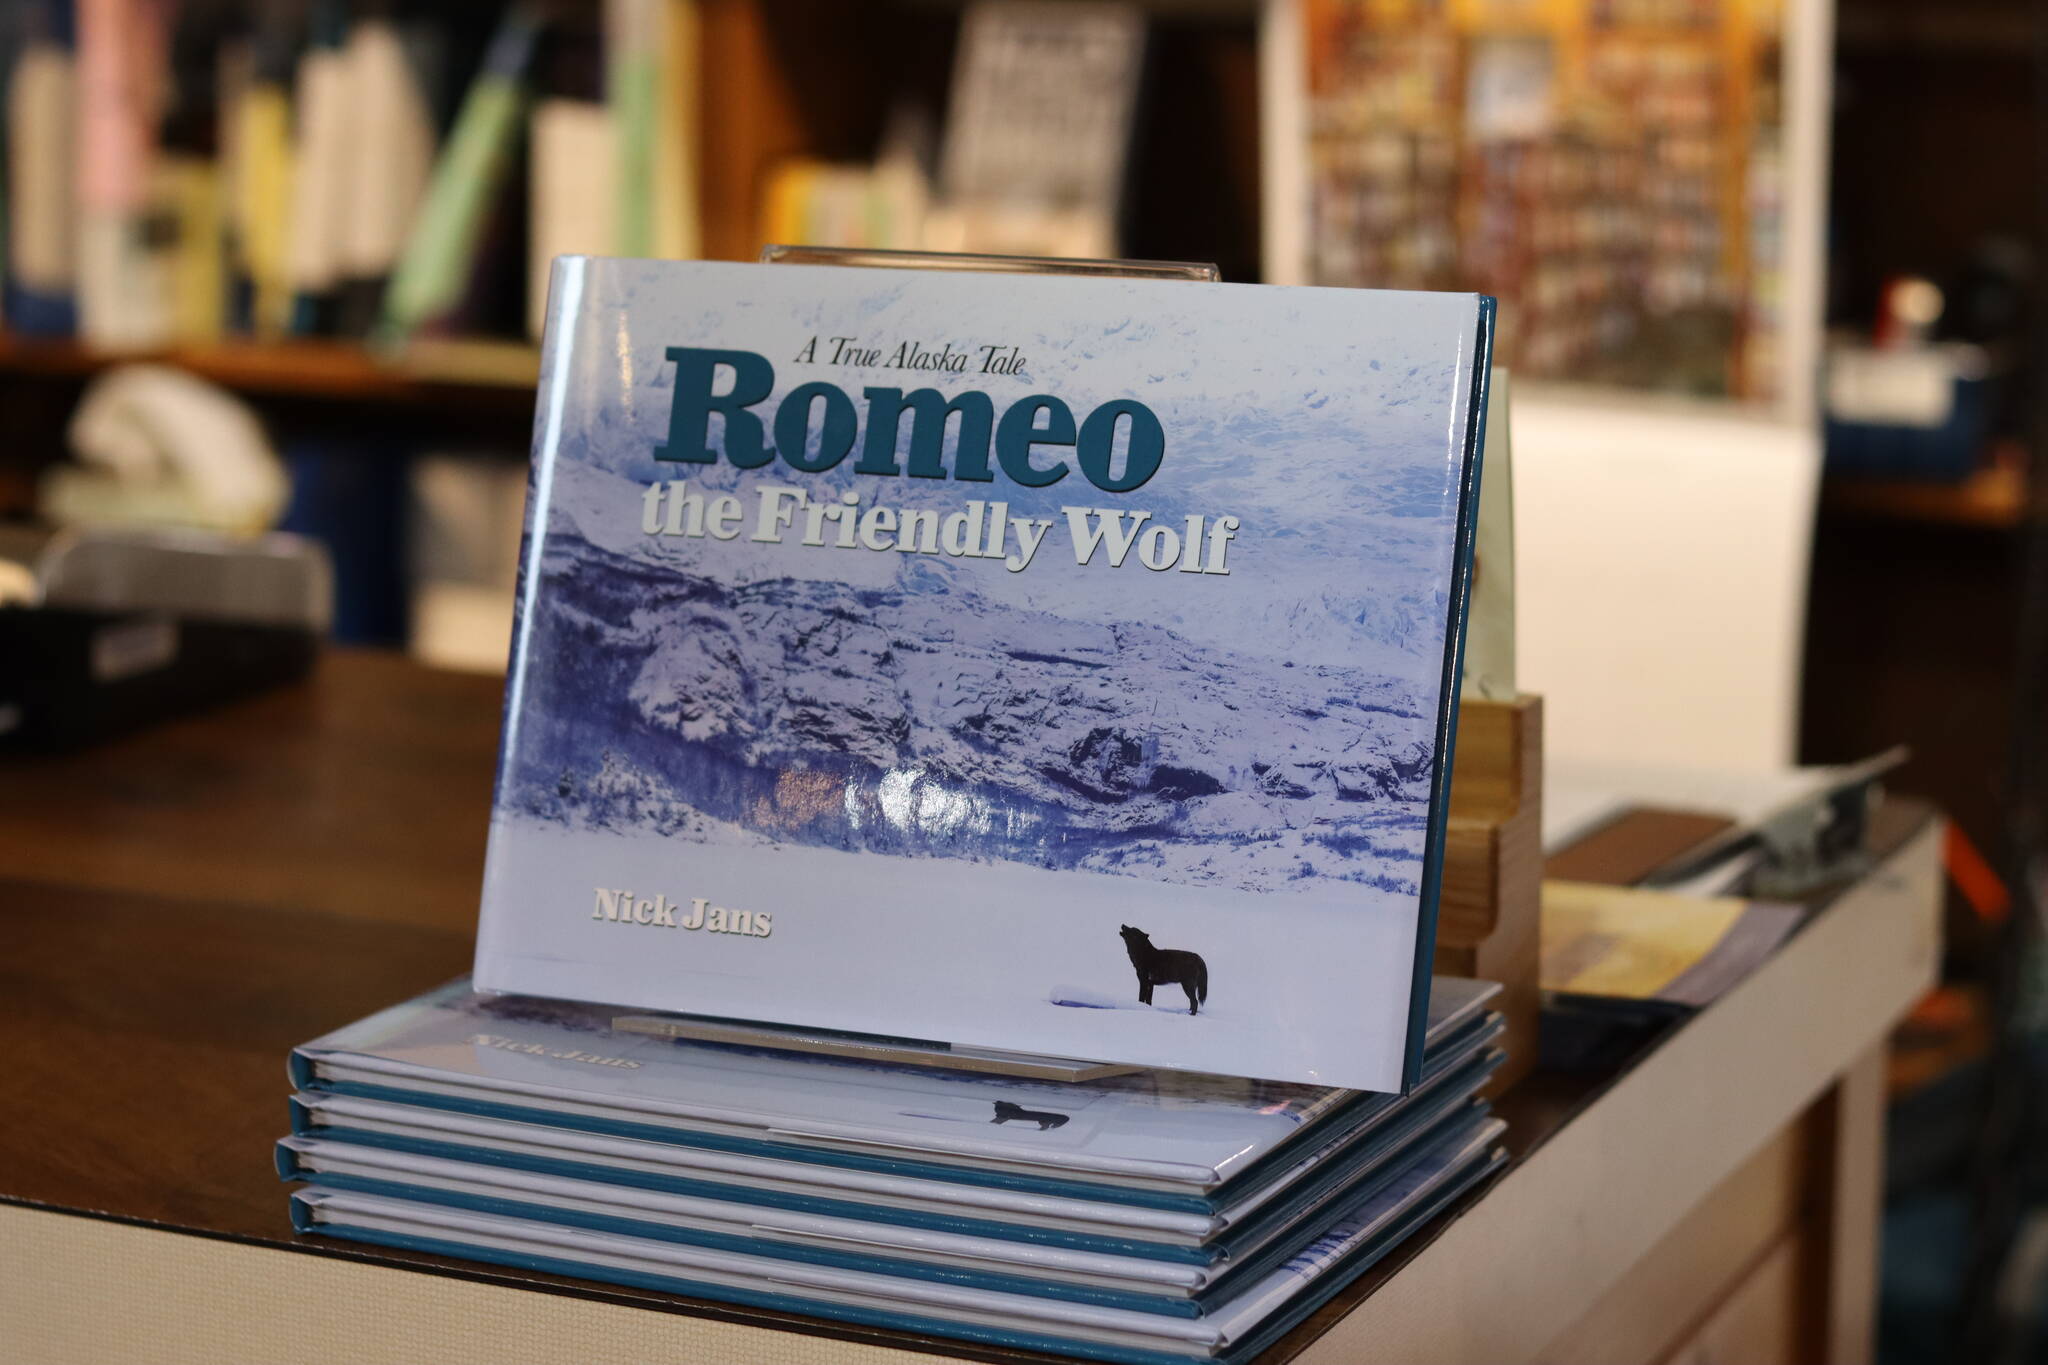 Copies of Nick Jans new book, “Romeo the Friendly Wolf,” arrived at Hearthside Books about two weeks ago. (Meredith Jordan / Juneau Empire)